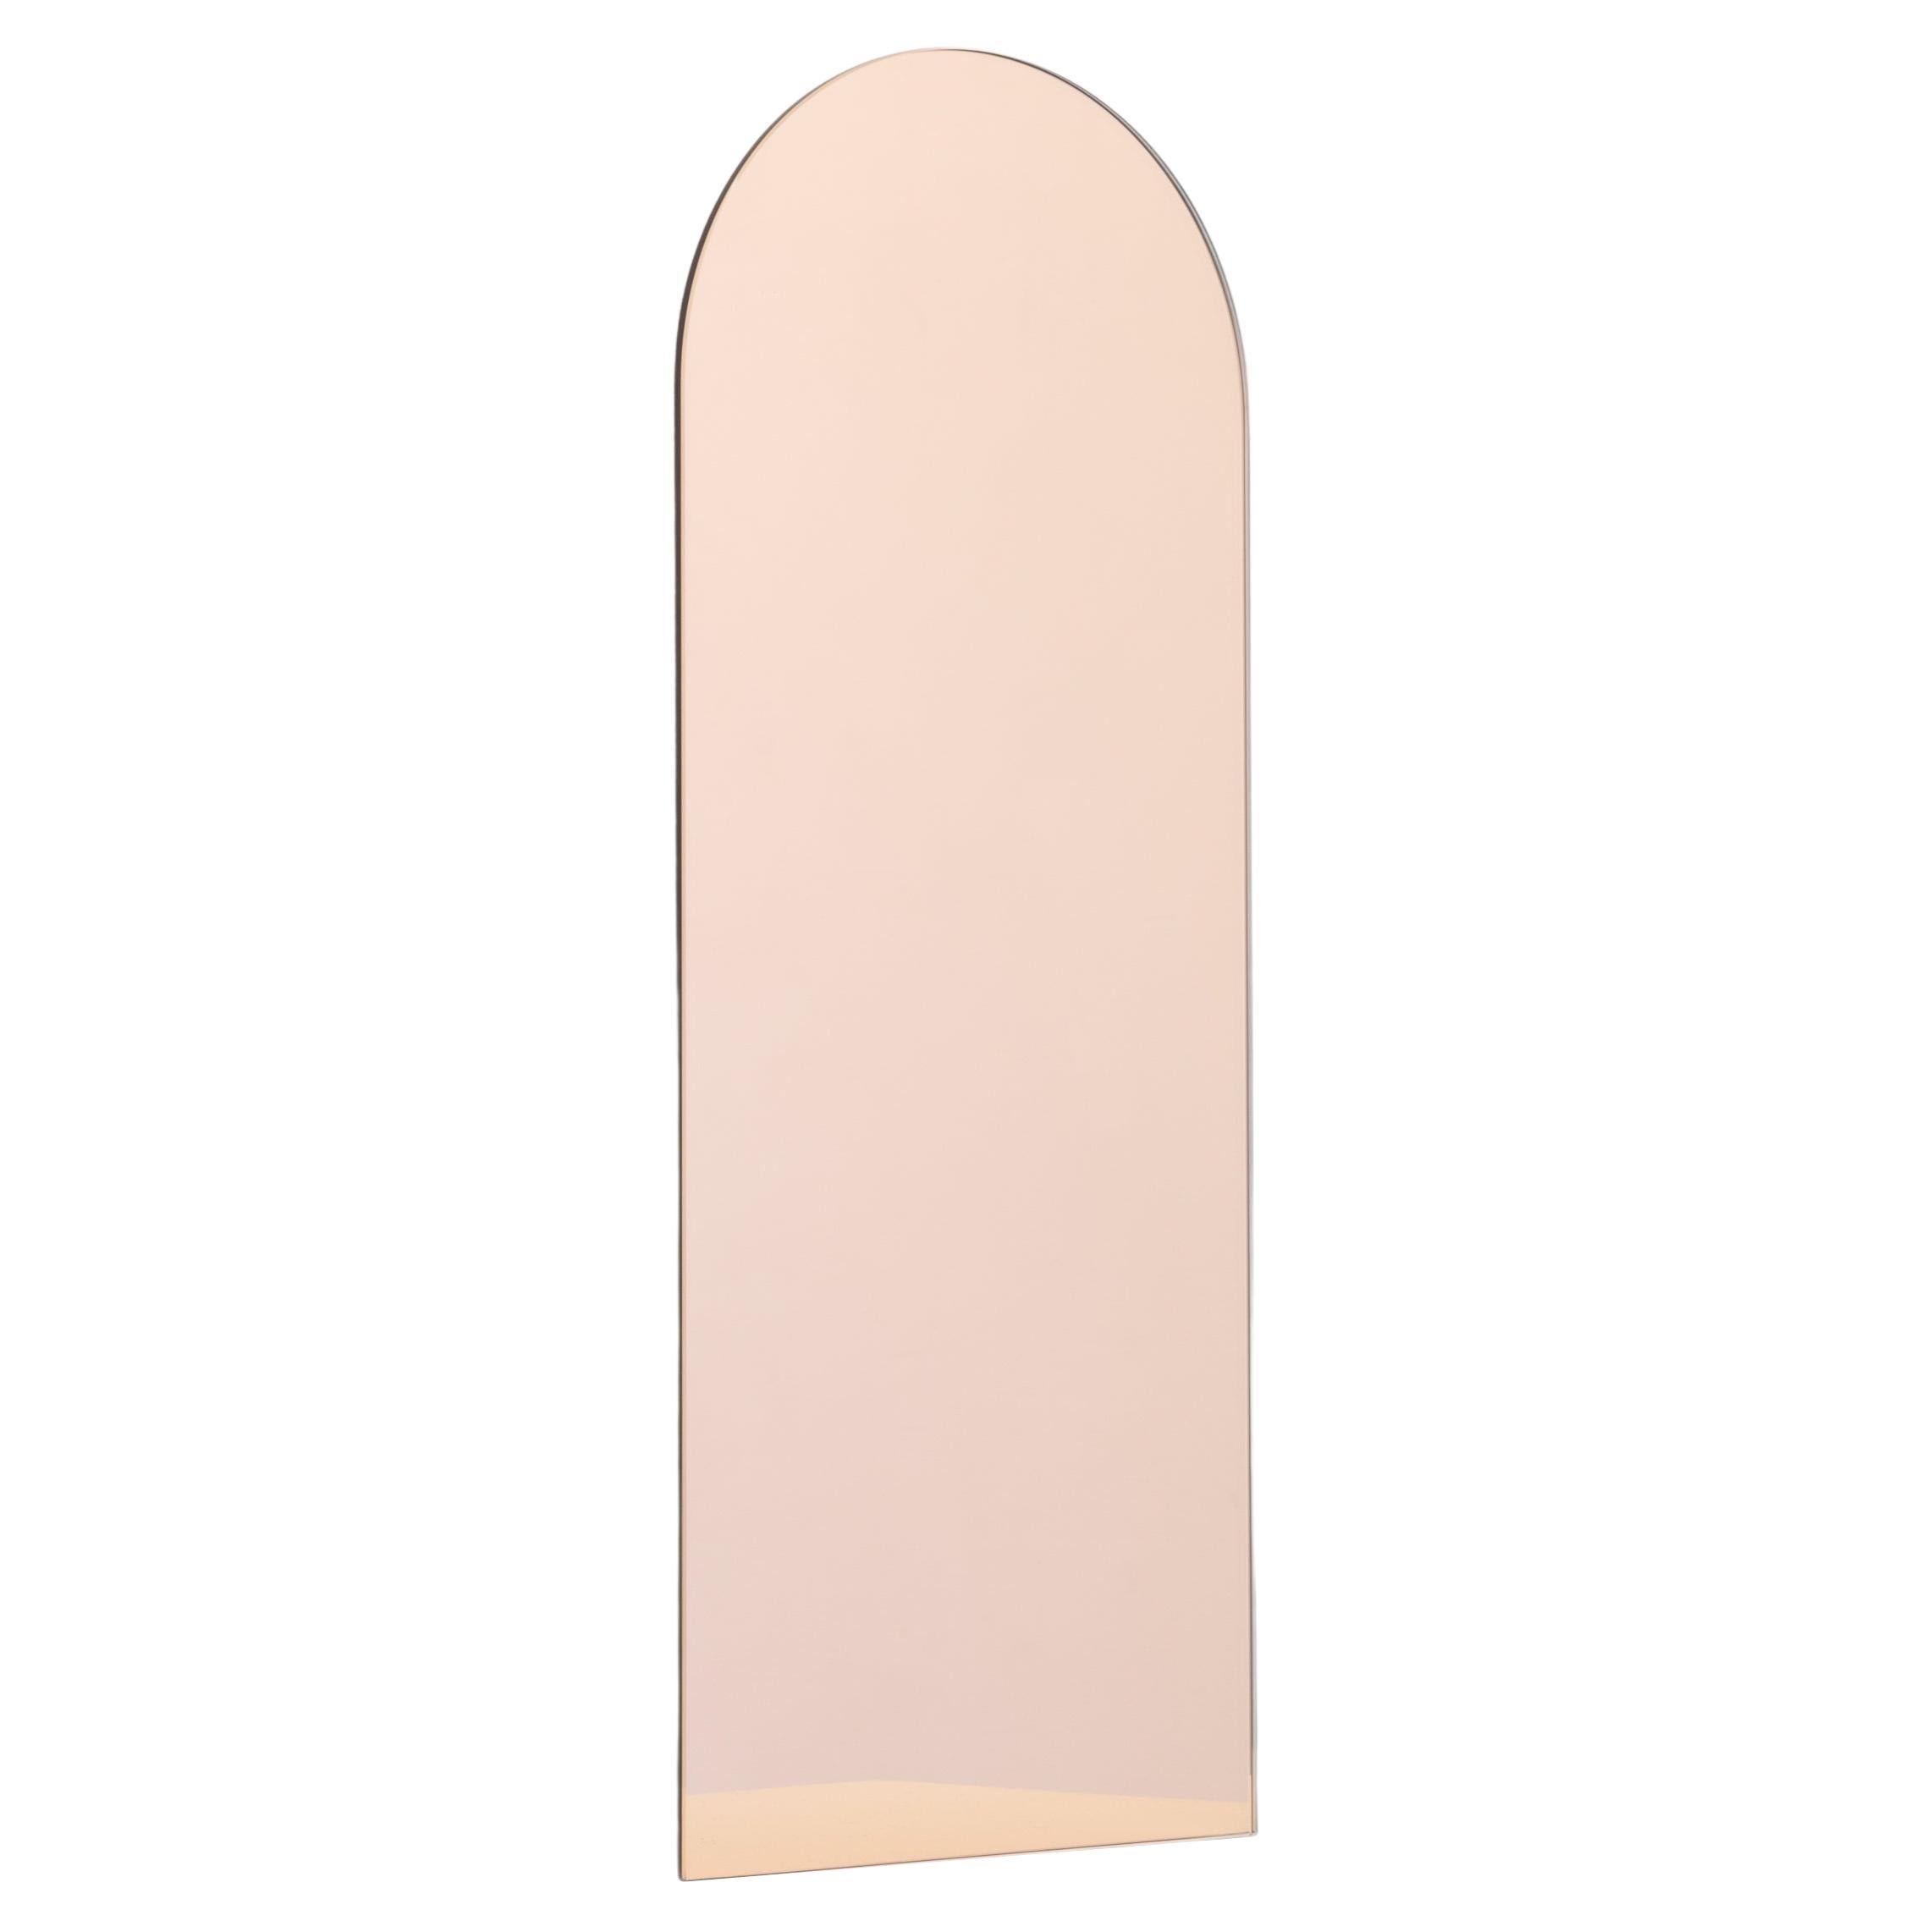 In Stock Arcus Rose Gold Arched Frameless Minimalist Customisable Mirror, Small For Sale